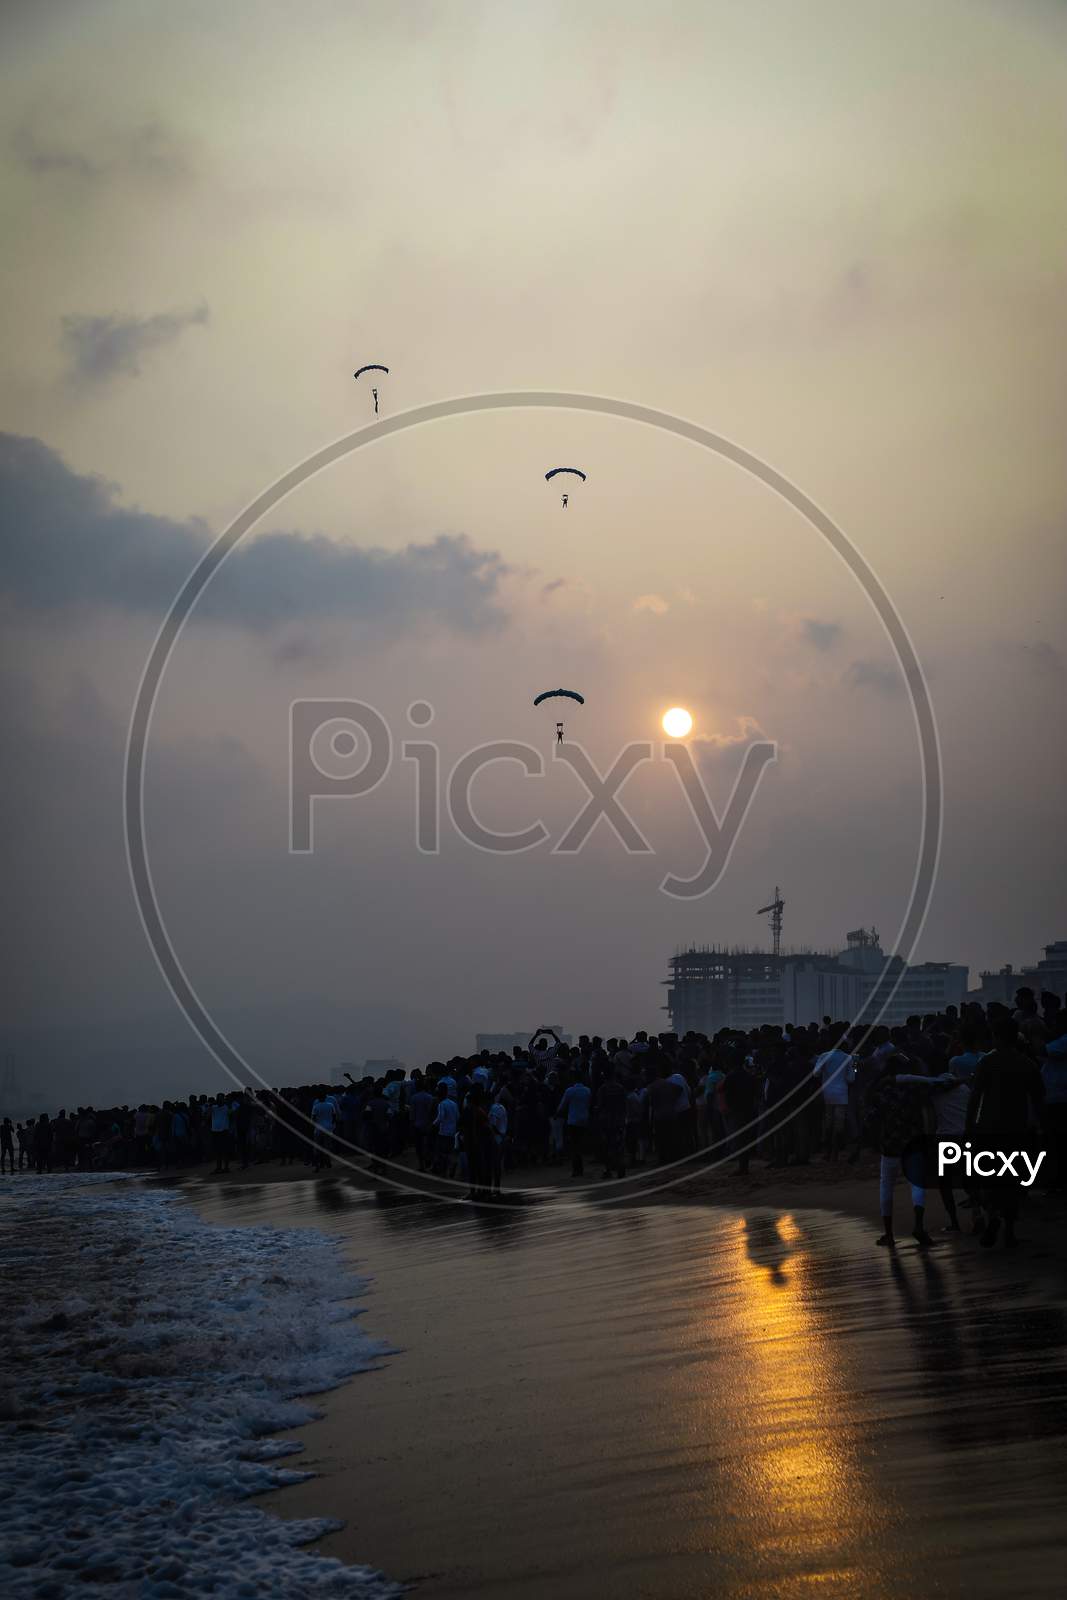 Indian Navy Paratroopers Demonstration At Indian Navy Day Celebrations in Vizag